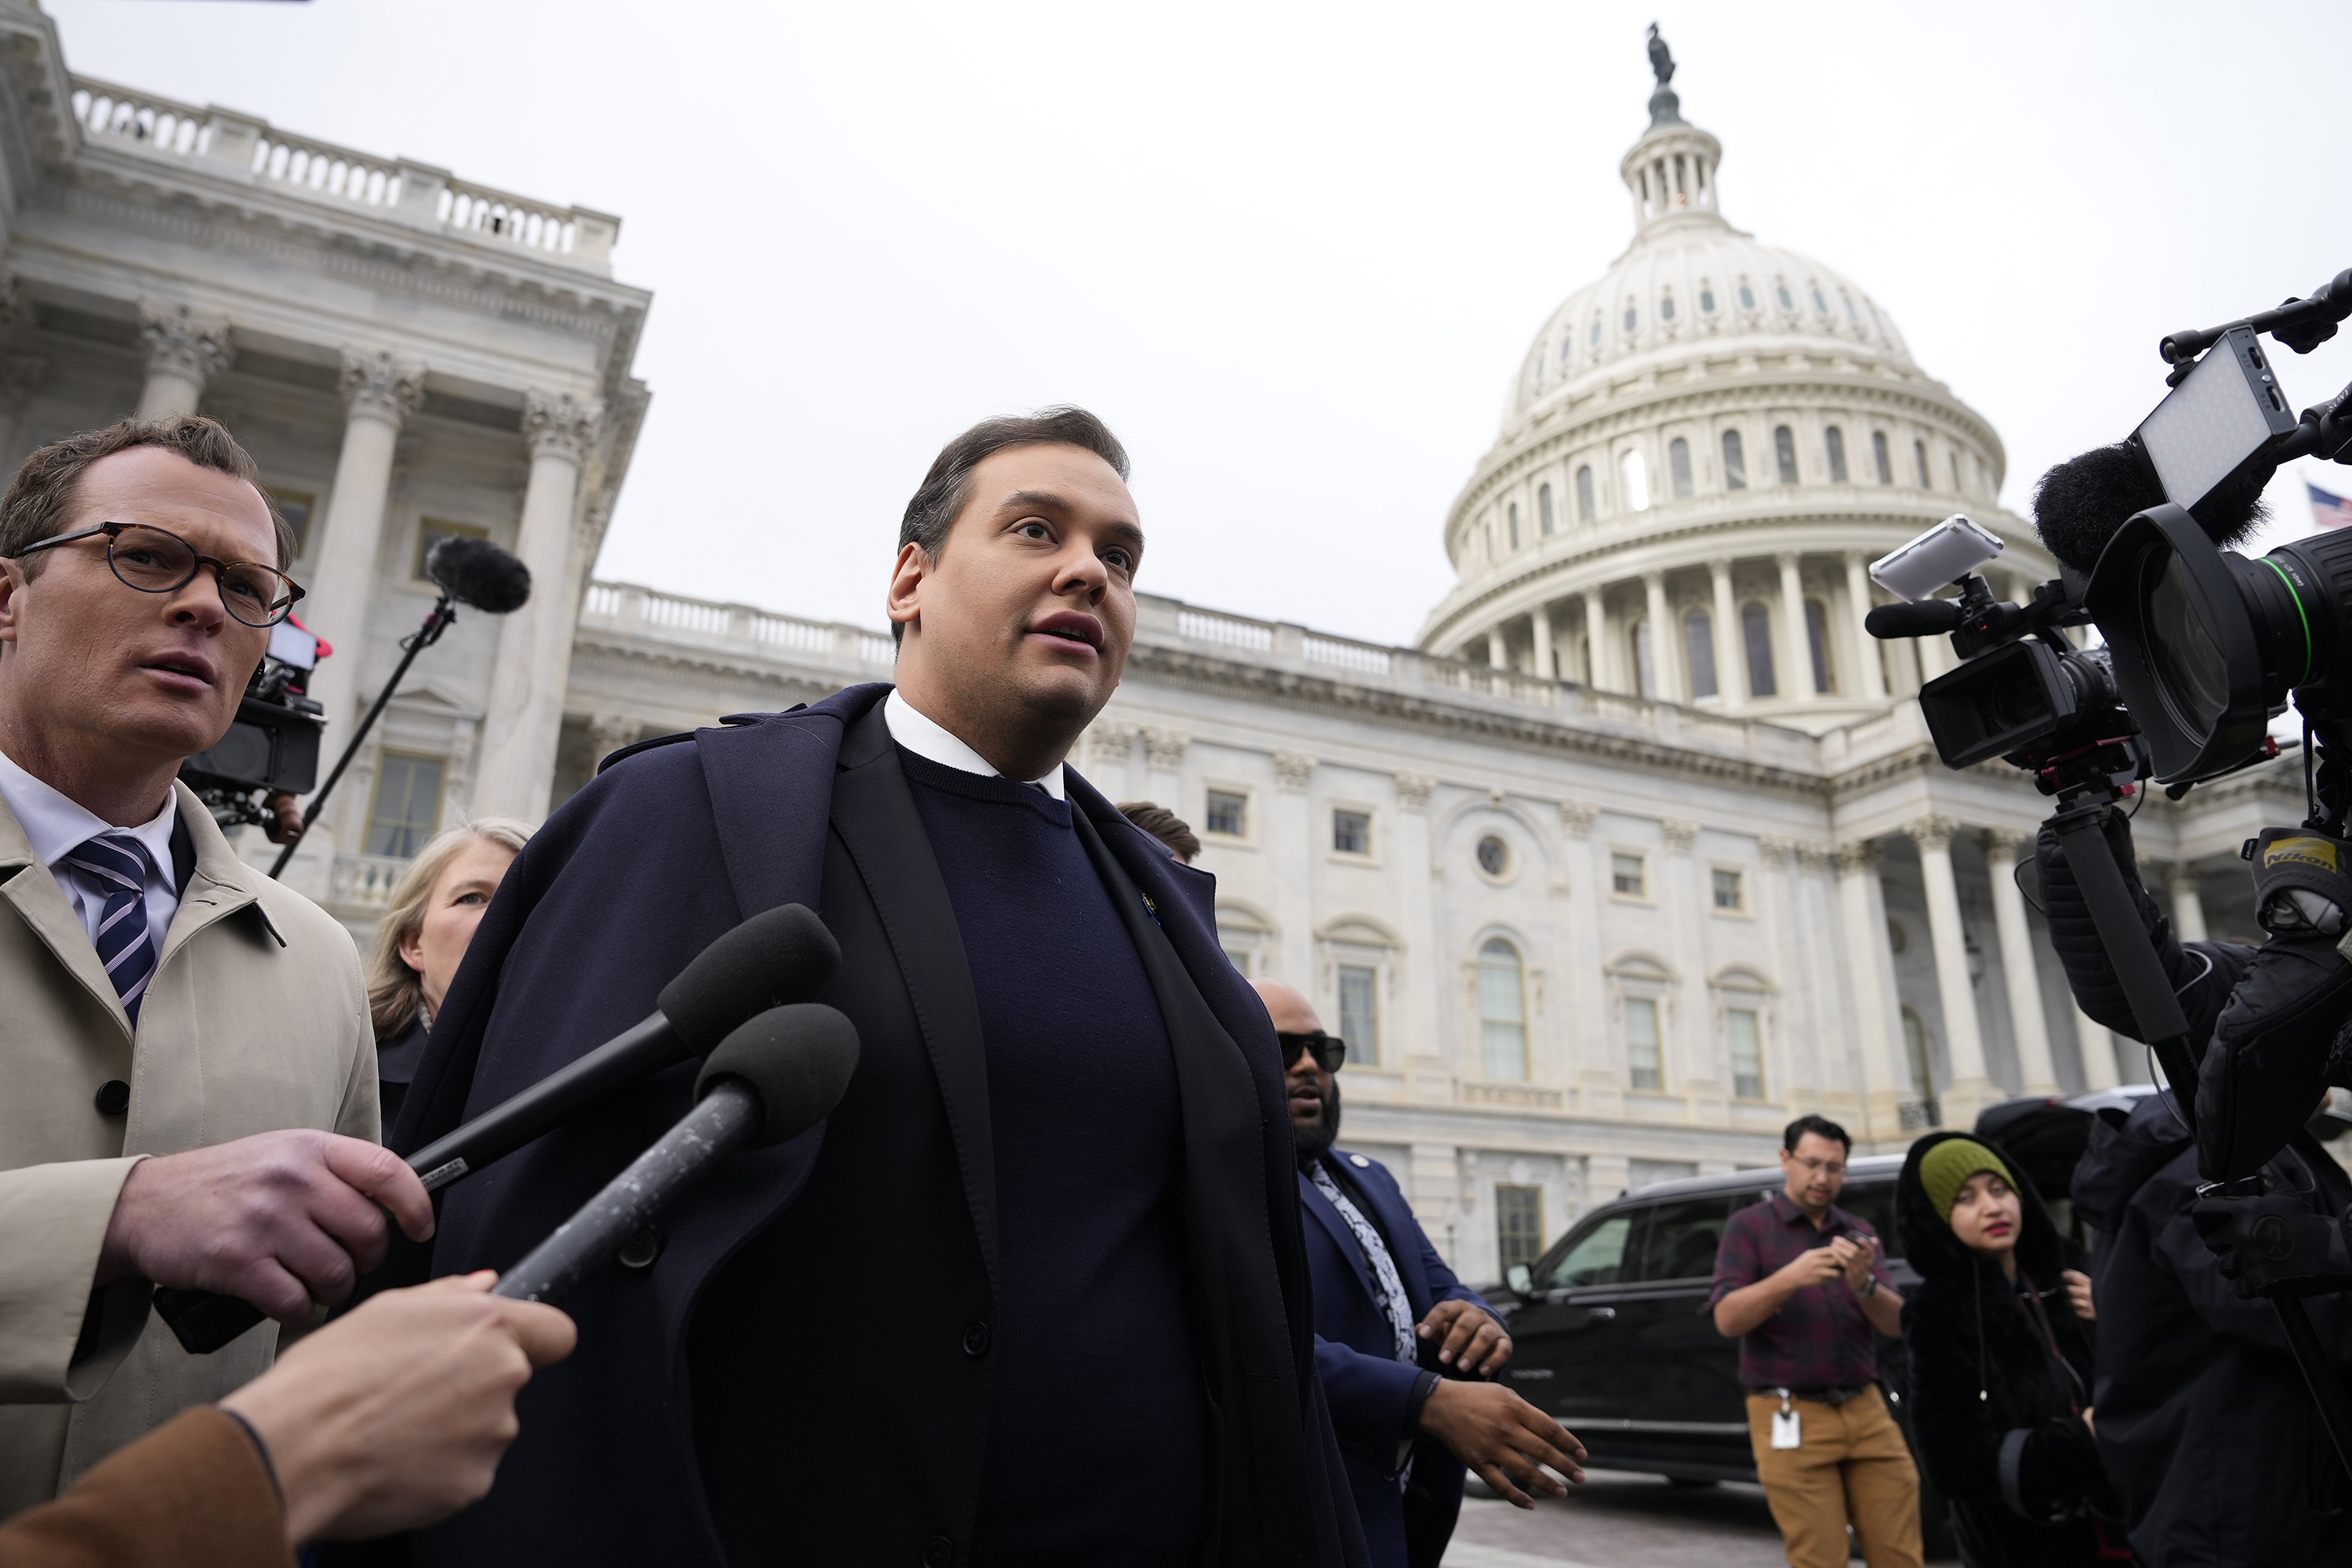 Rep. George Santos is surrounded by journalists as he leaves the U.S. Capitol after his fellow members of Congress voted to expel him from the House of Representatives on December 1, in Washington, DC.